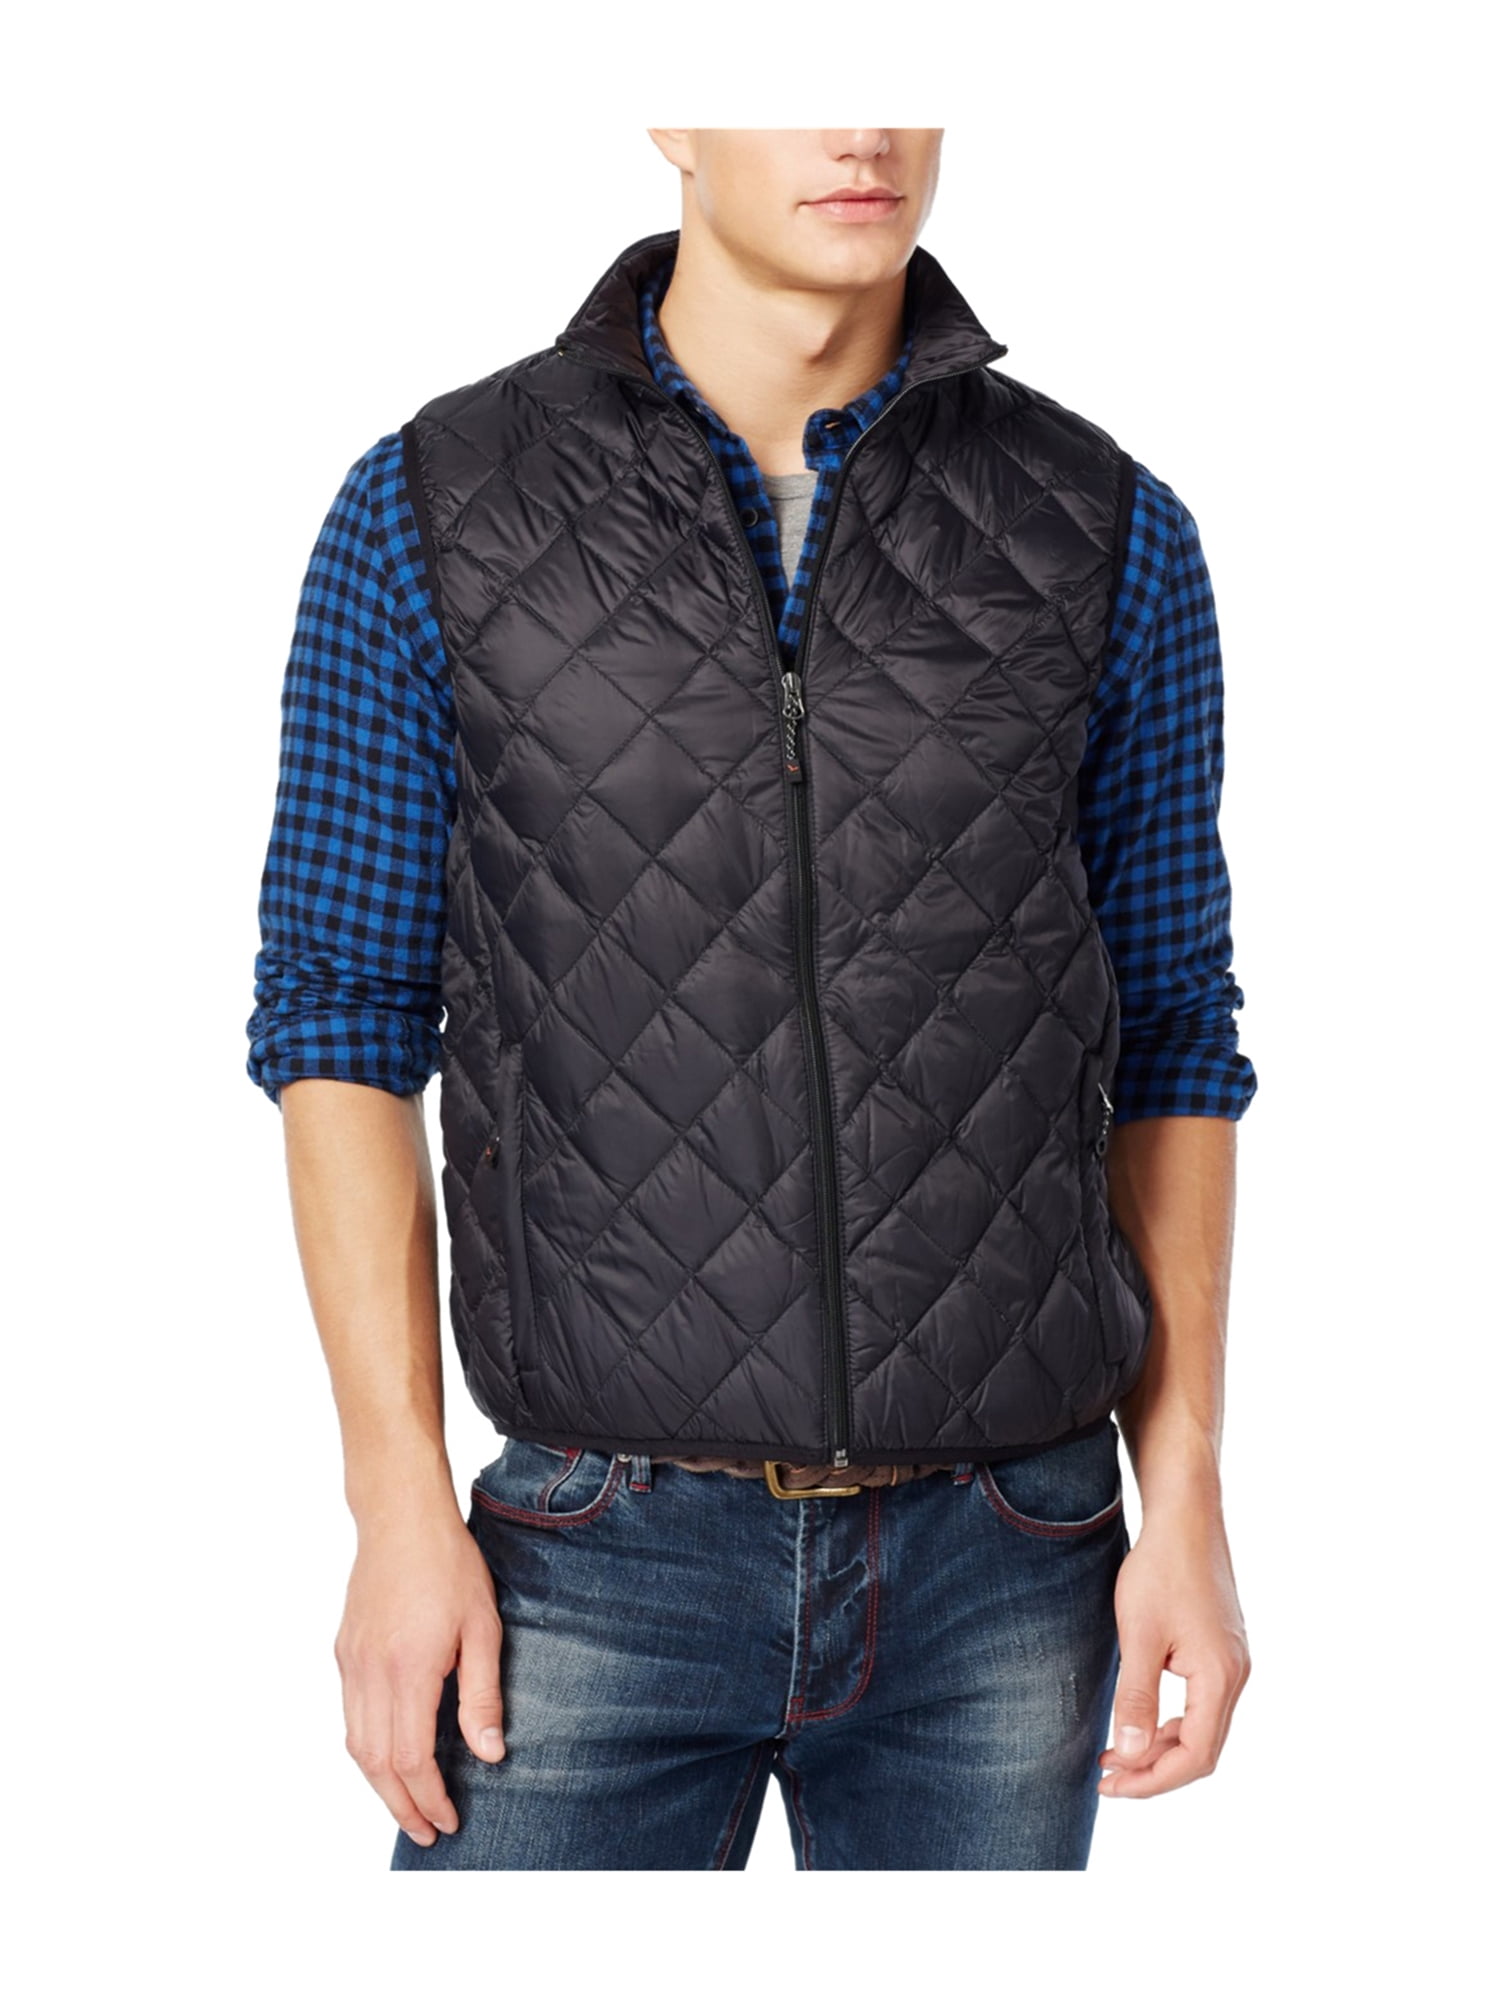 Hawke & Co. - Hawke & Co. Mens Packable Quilted Vest - Walmart.com ...